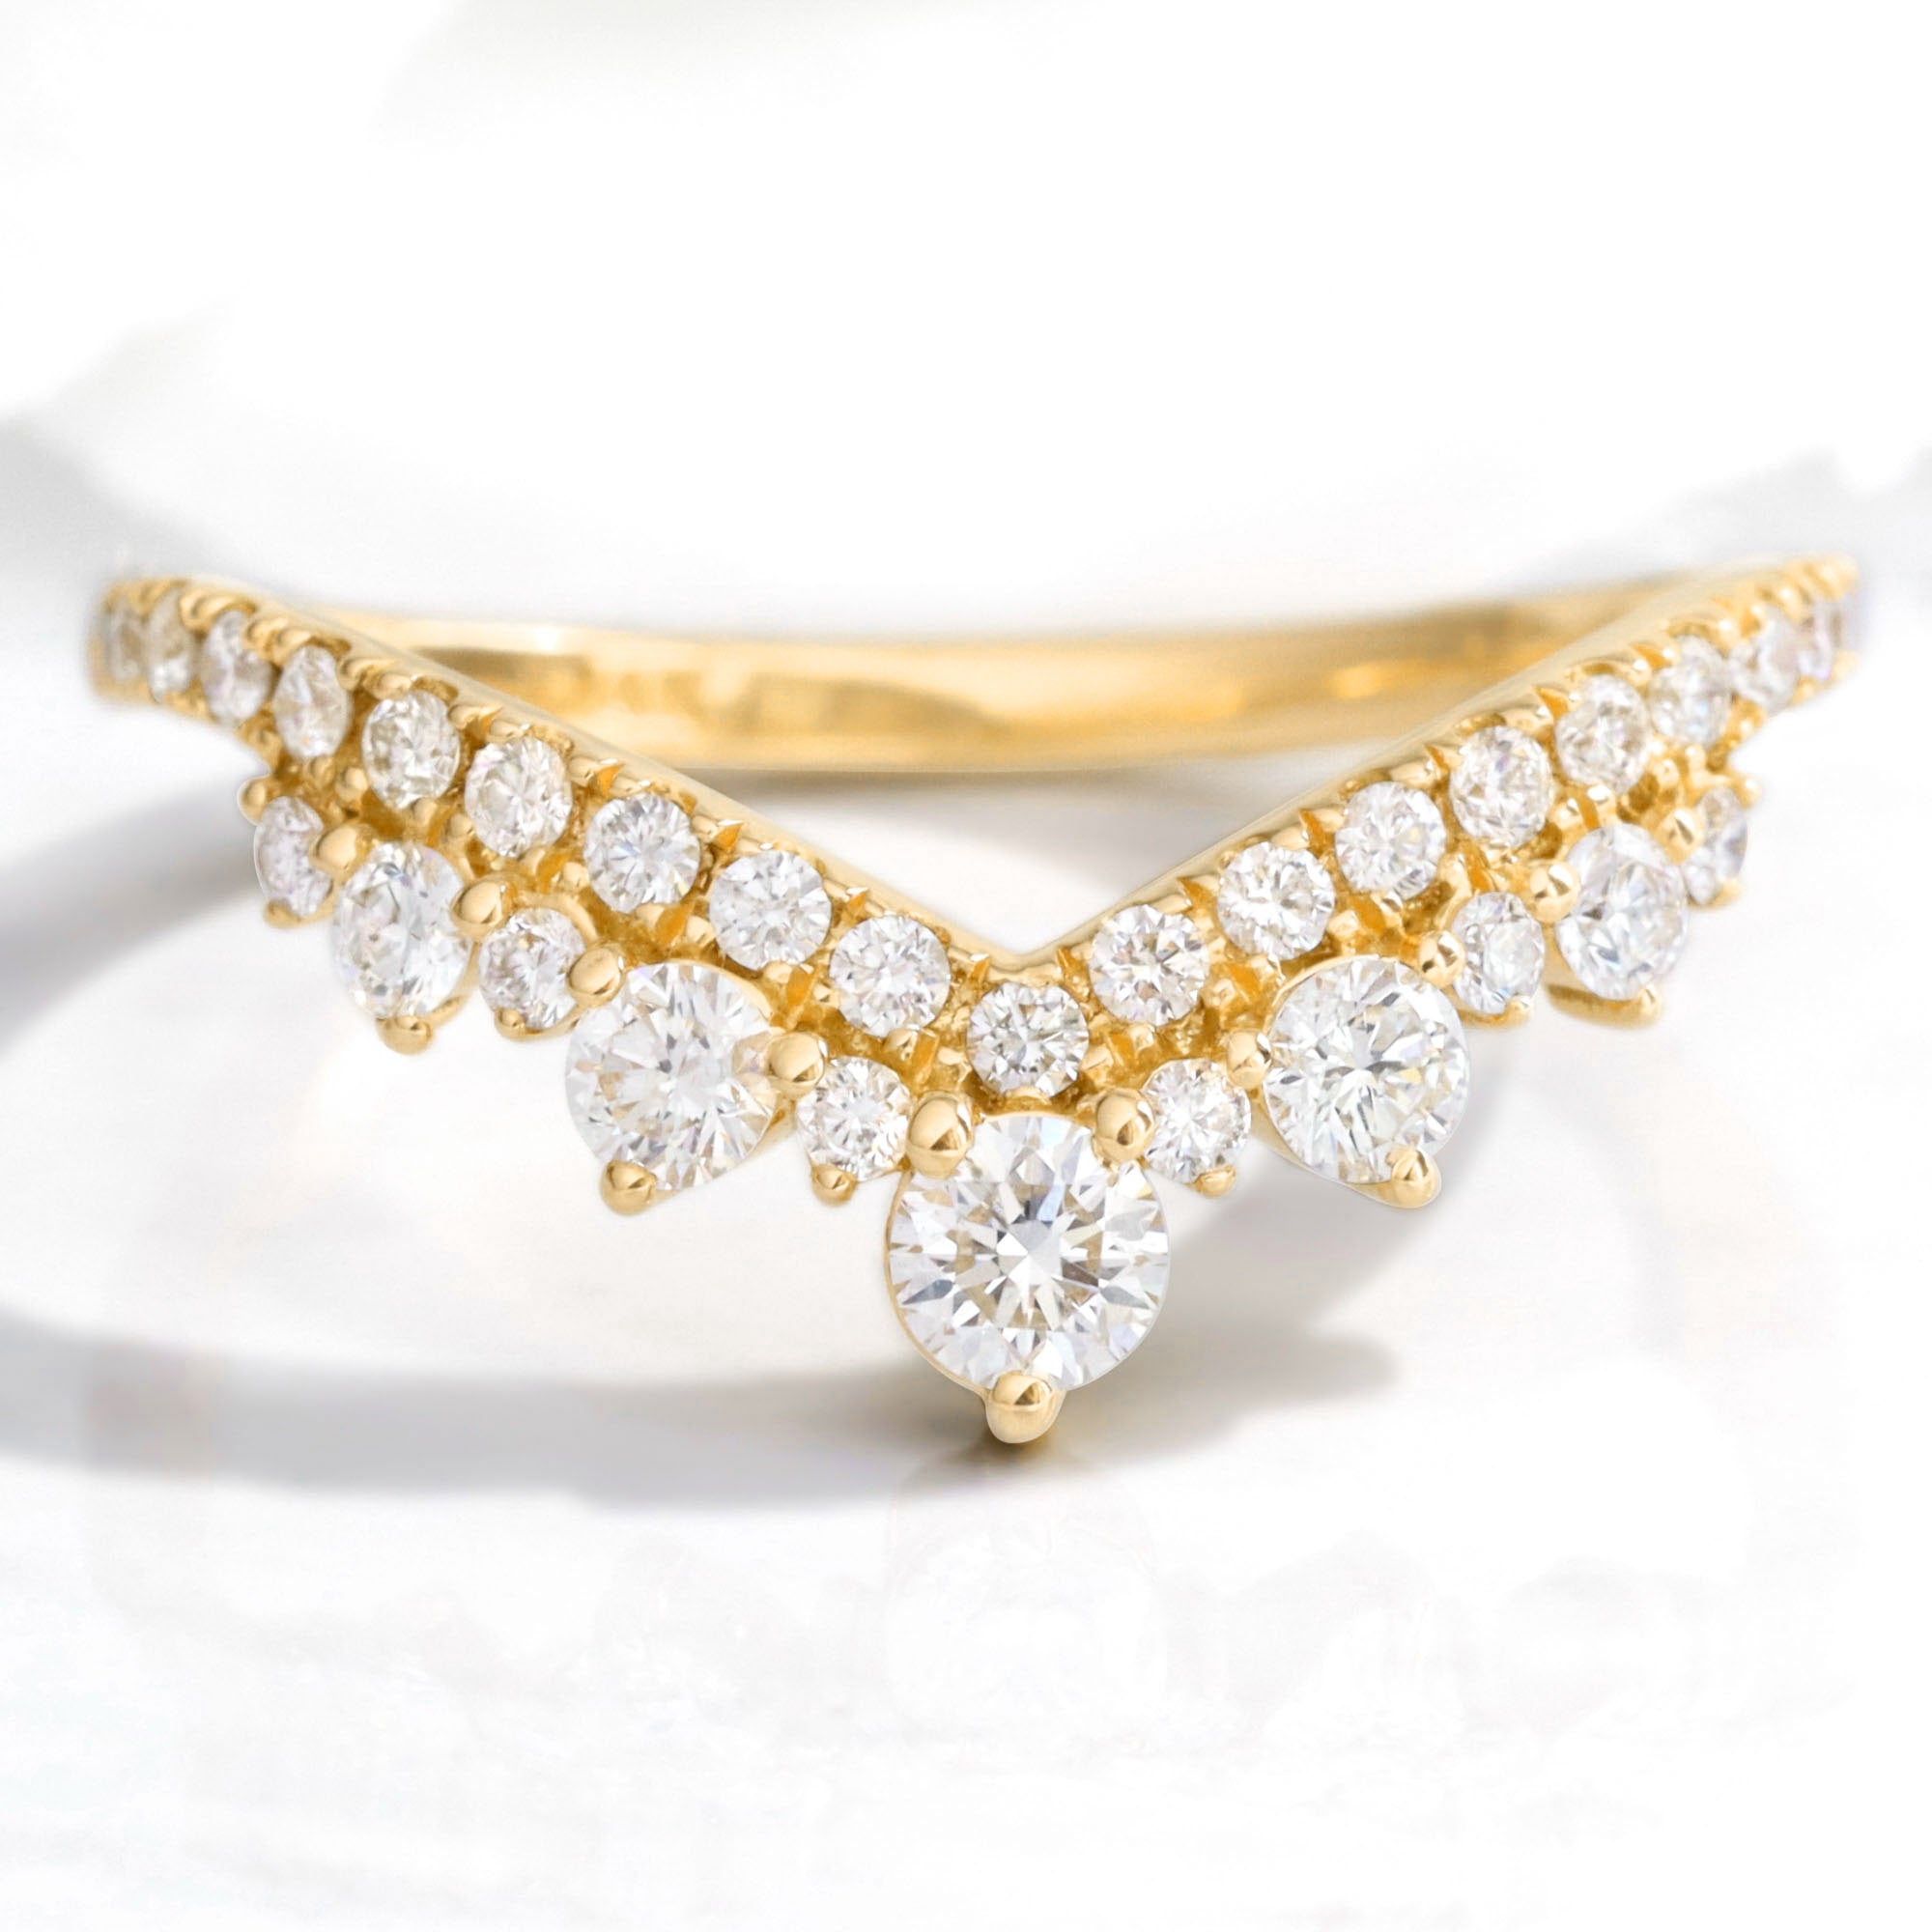 Large diamond wedding ring yellow gold curved pave diamond band by la more design jewelry